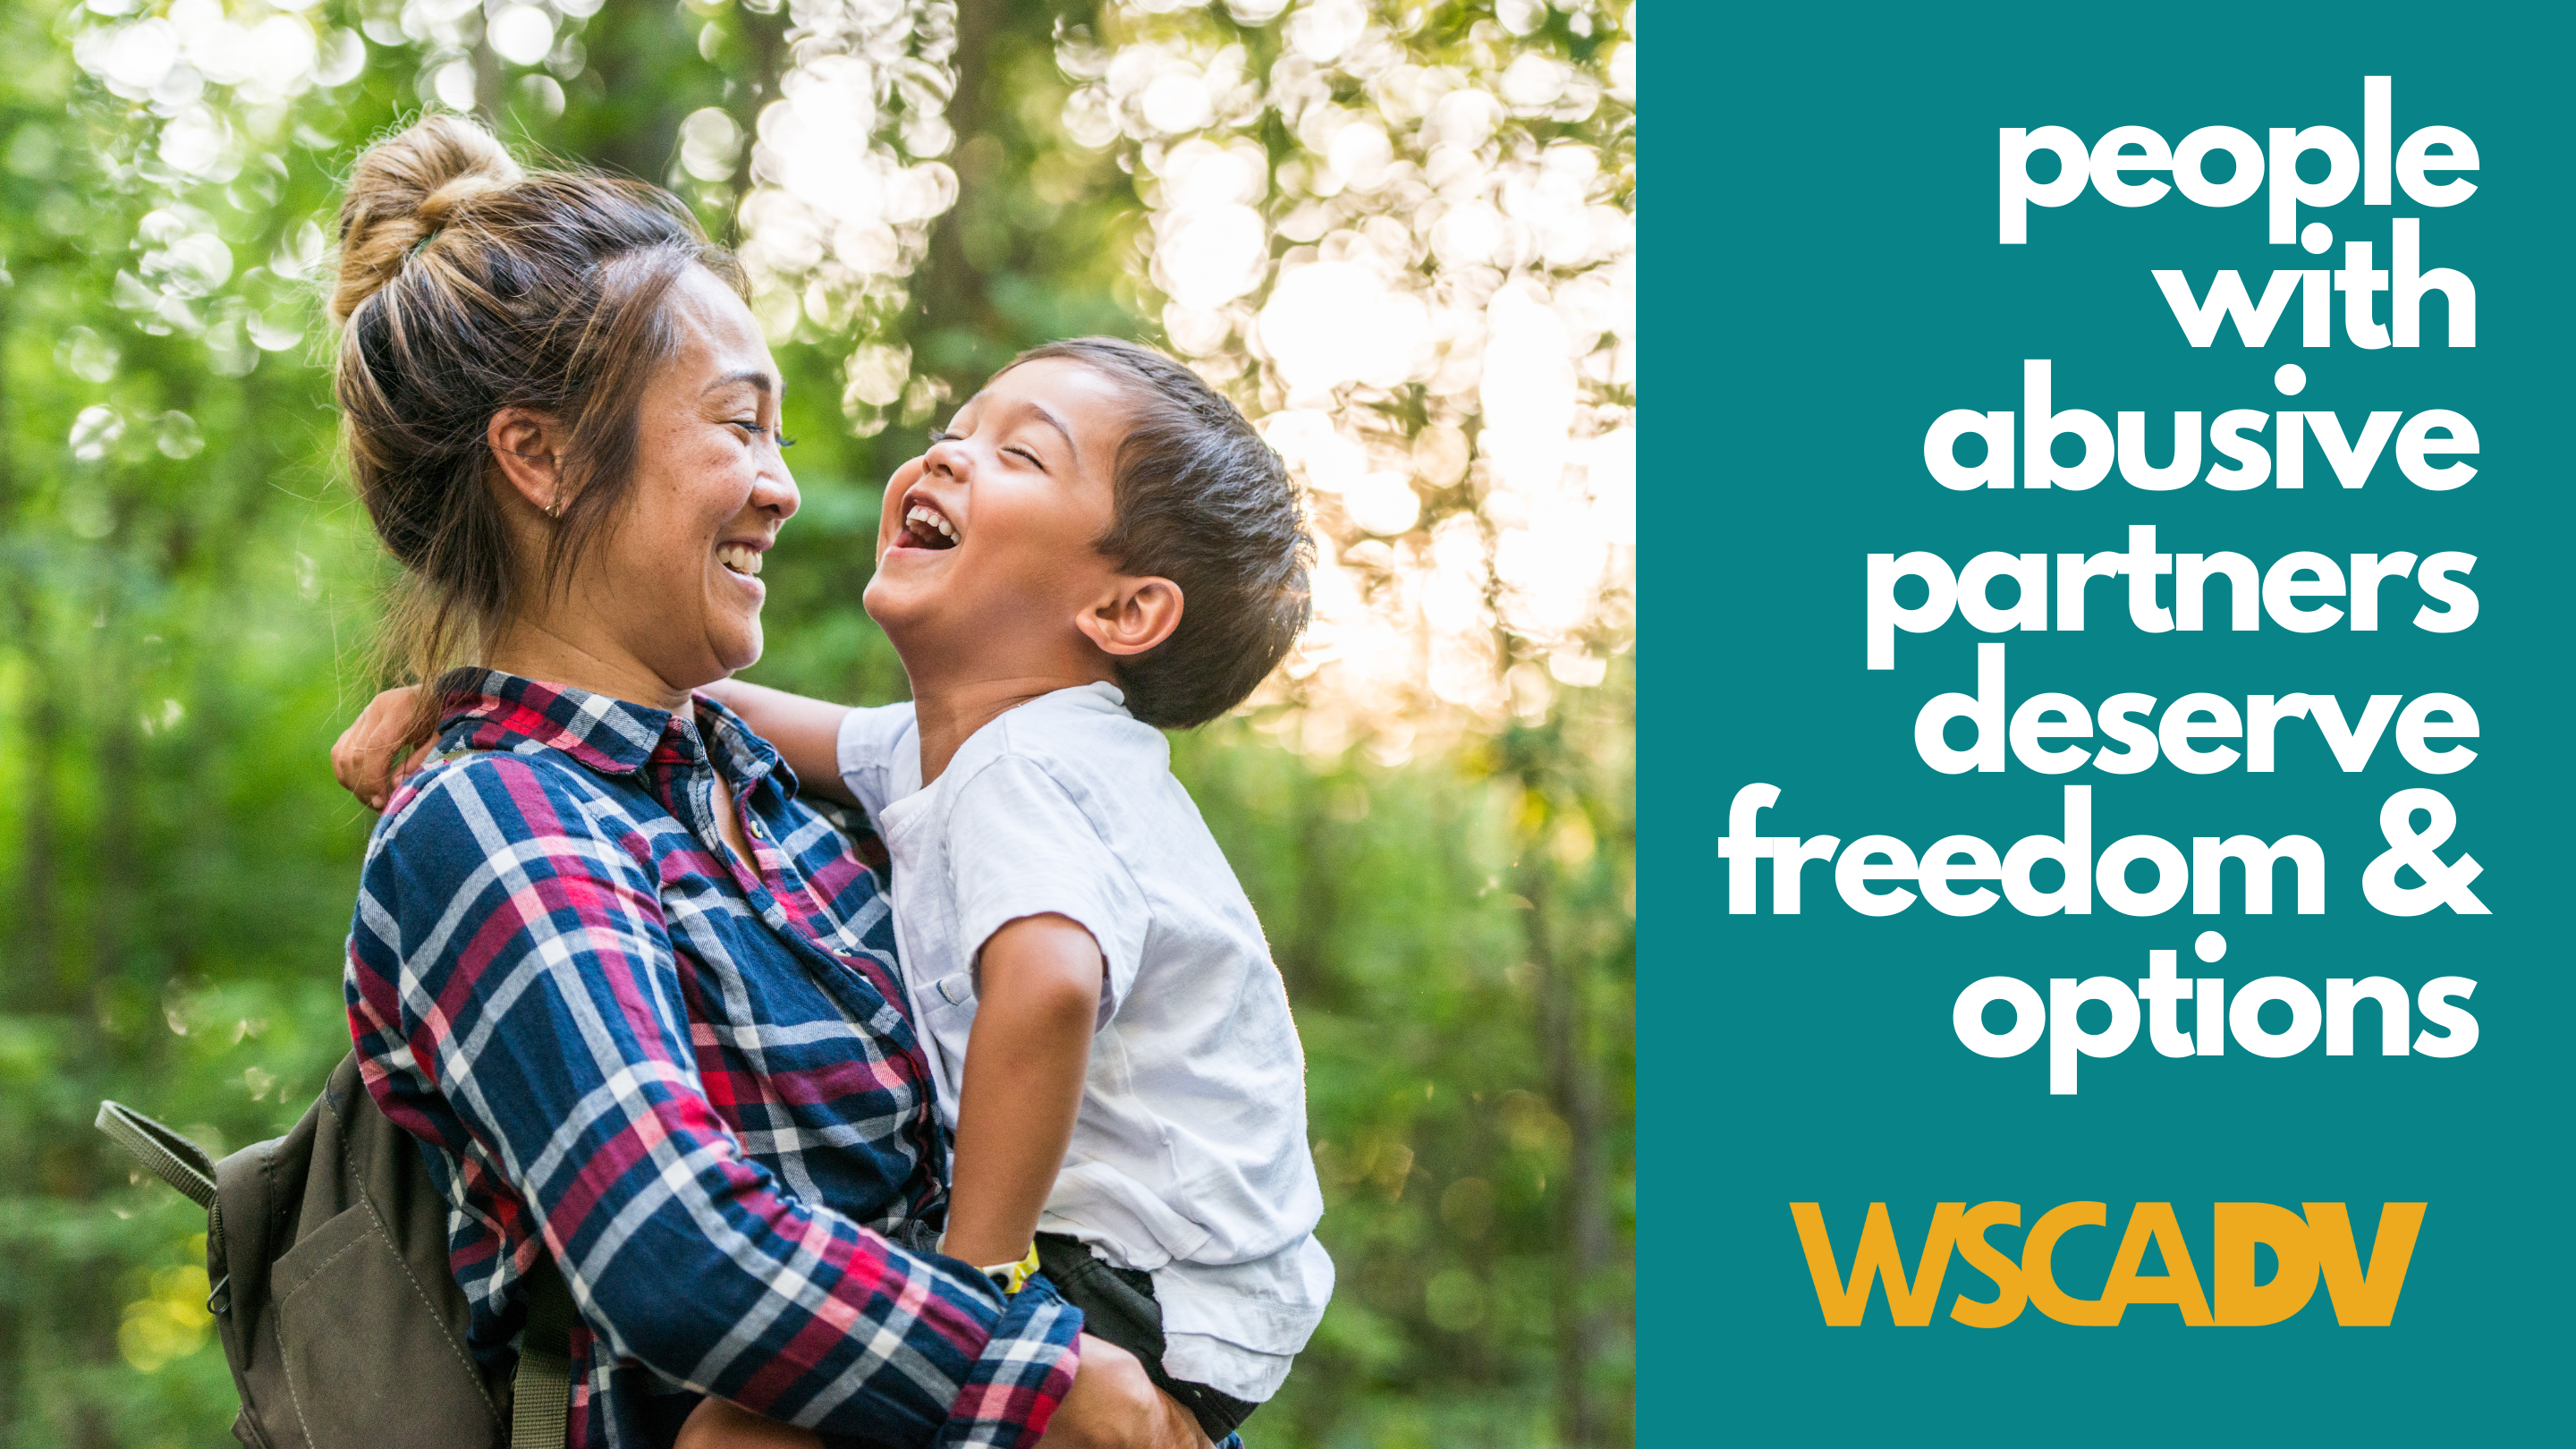 Photo of a mixed race woman holding child, both are laughing. Text says "people with abusive partners deserve freedom and options"